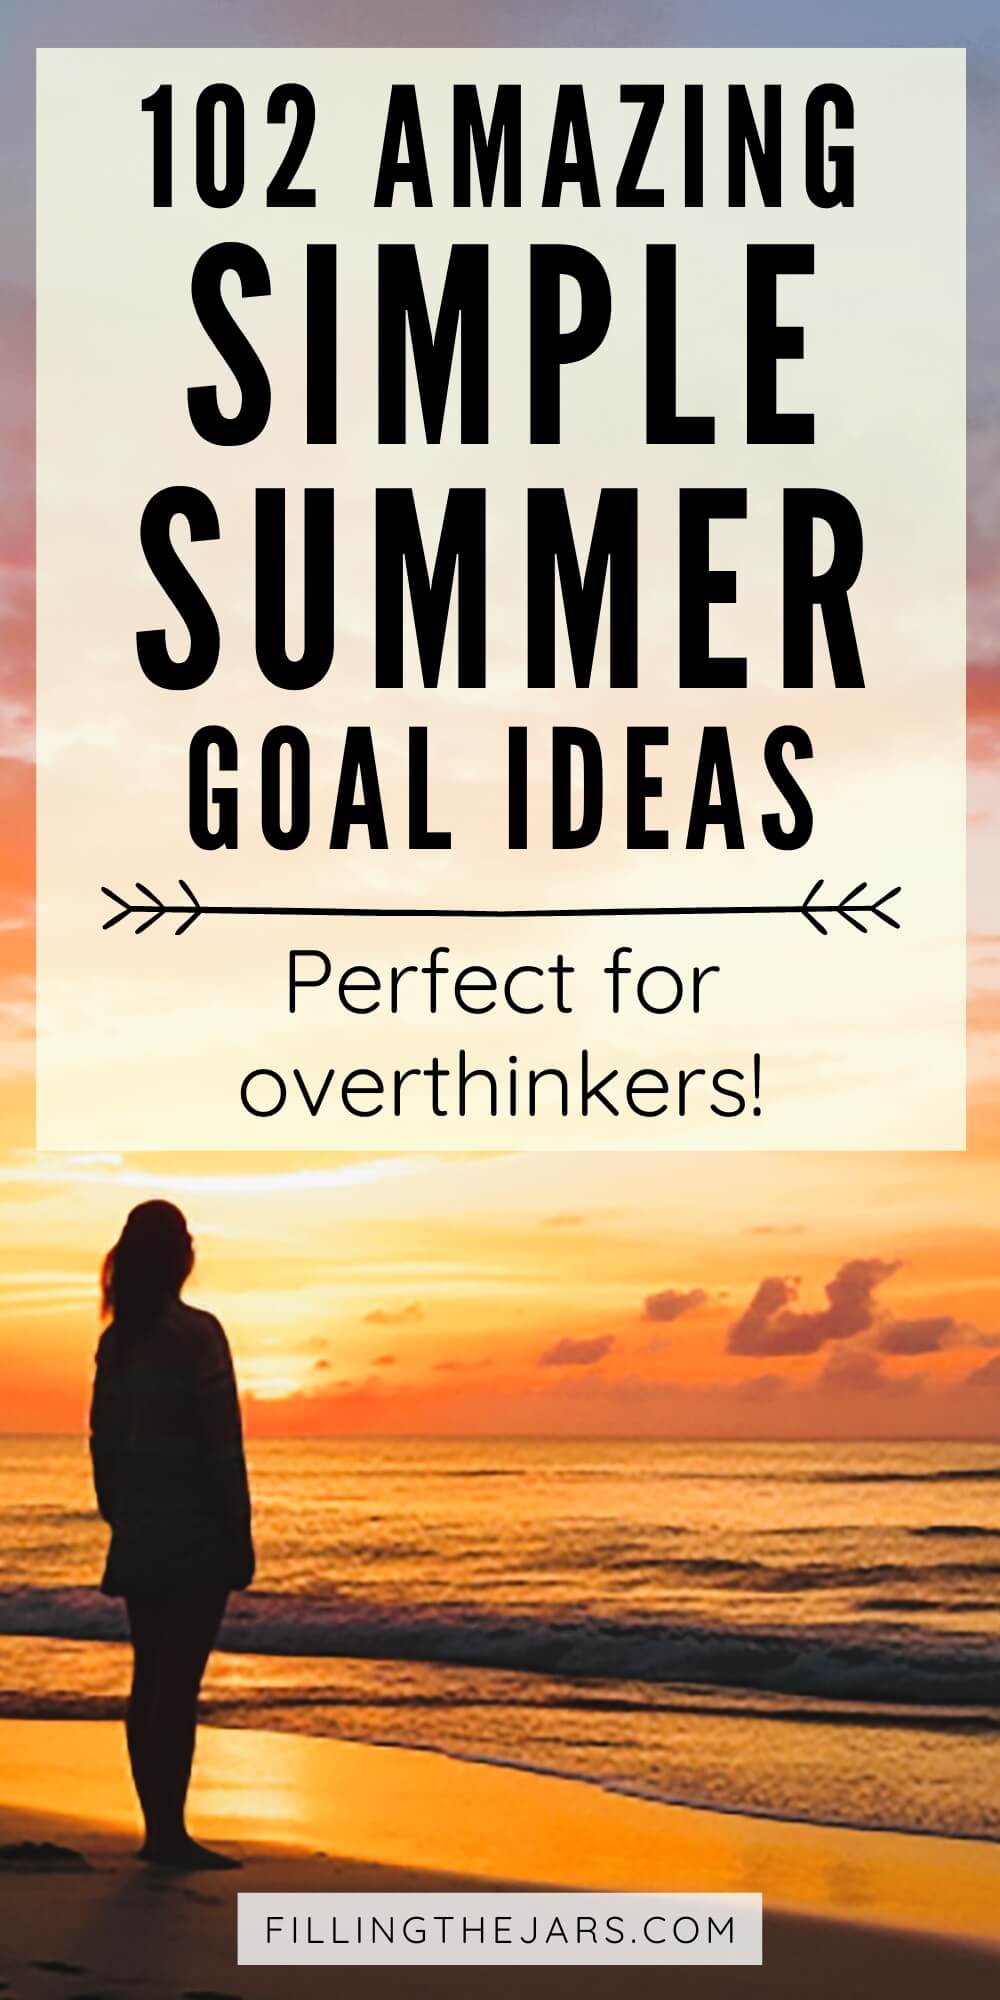 Text 102 amazing simple summer goal ideas on creamy background over woman standing on beach watching summer sunrise.